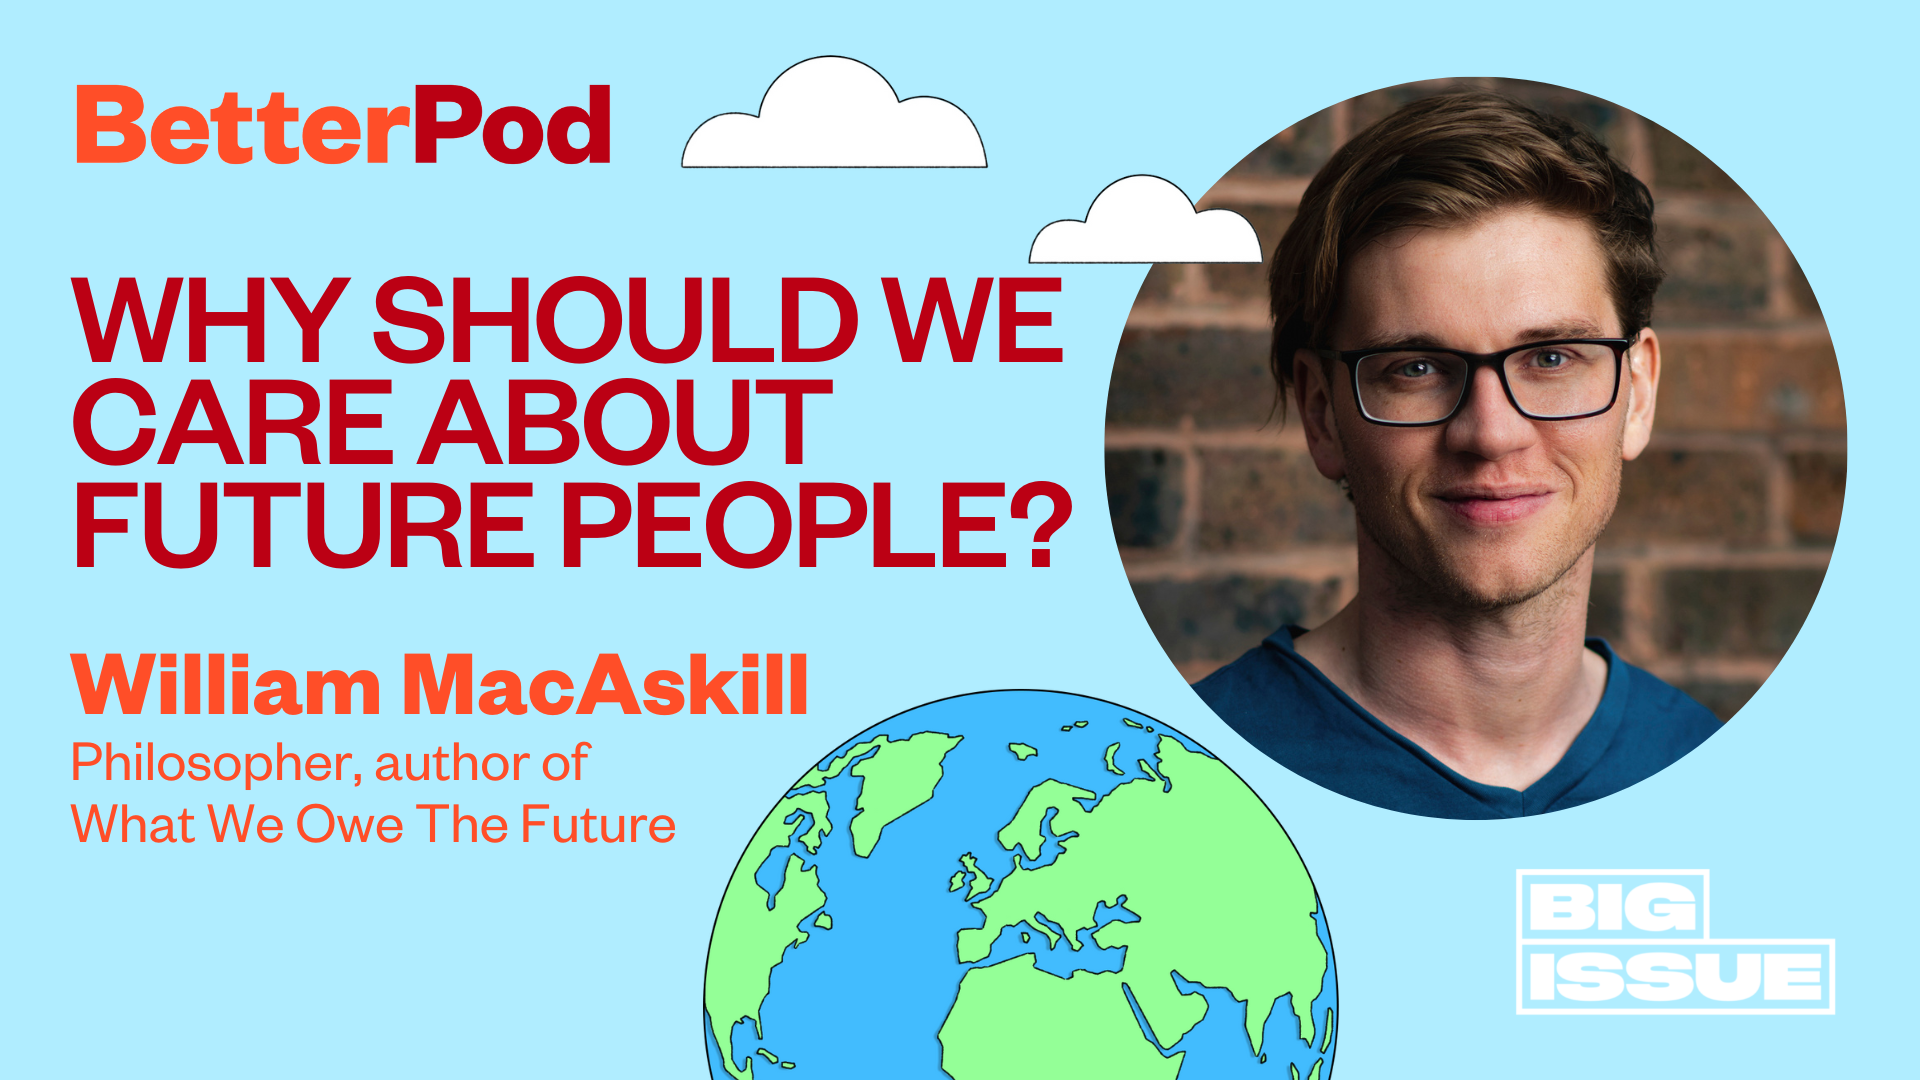 William MacAskill: Why should we care about future people?